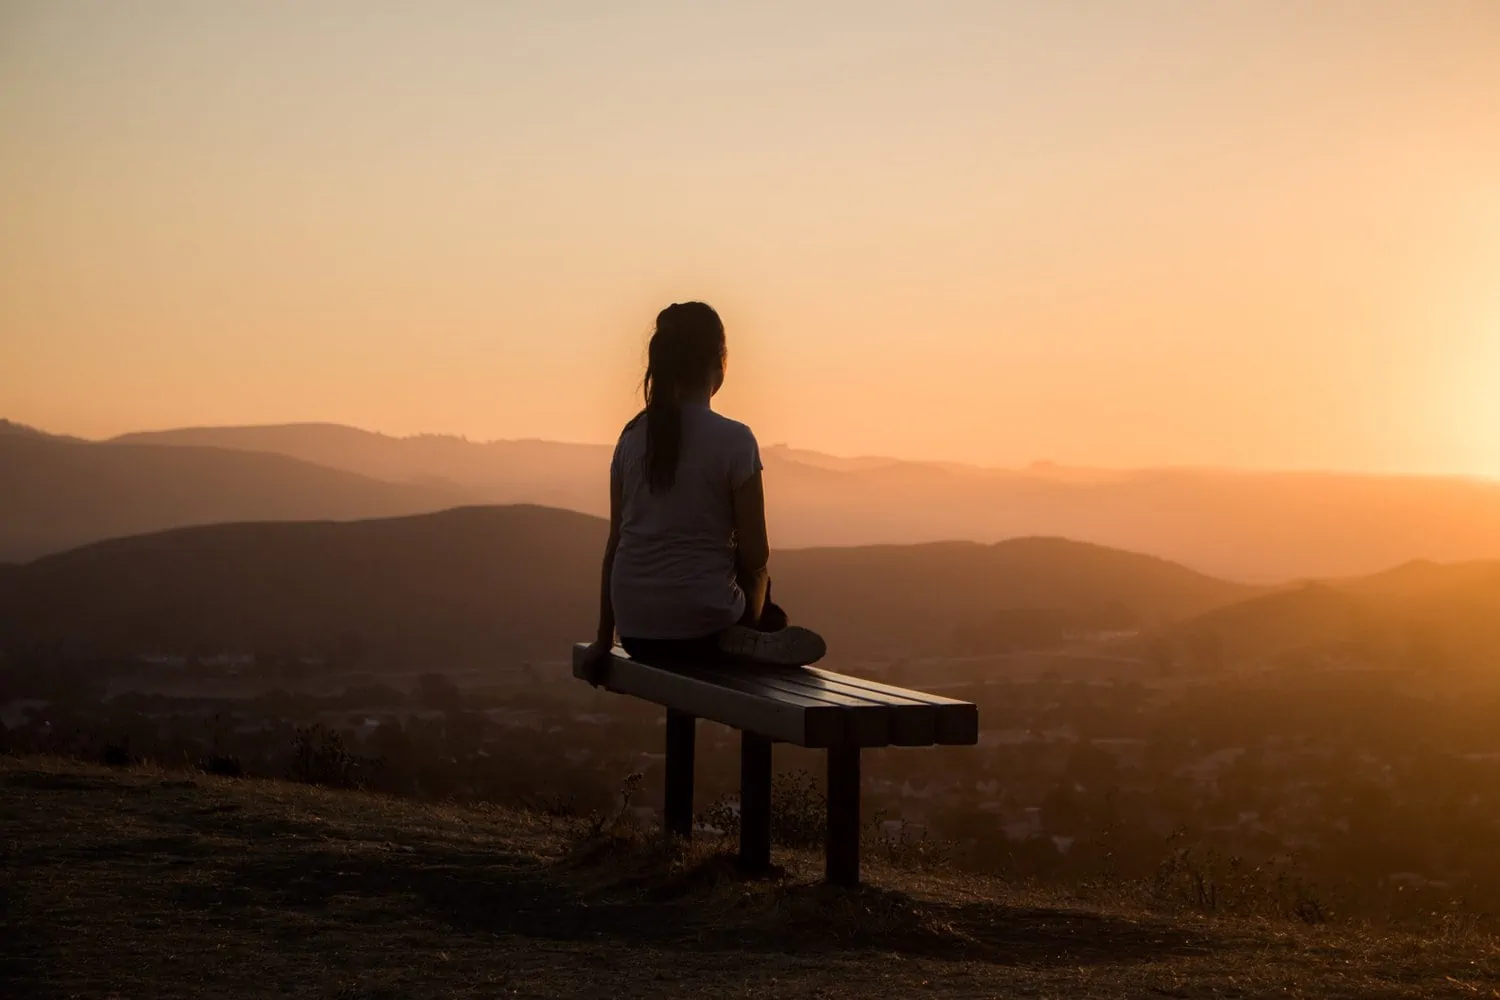 Woman sitting on bench during the sunset wondering about regrets